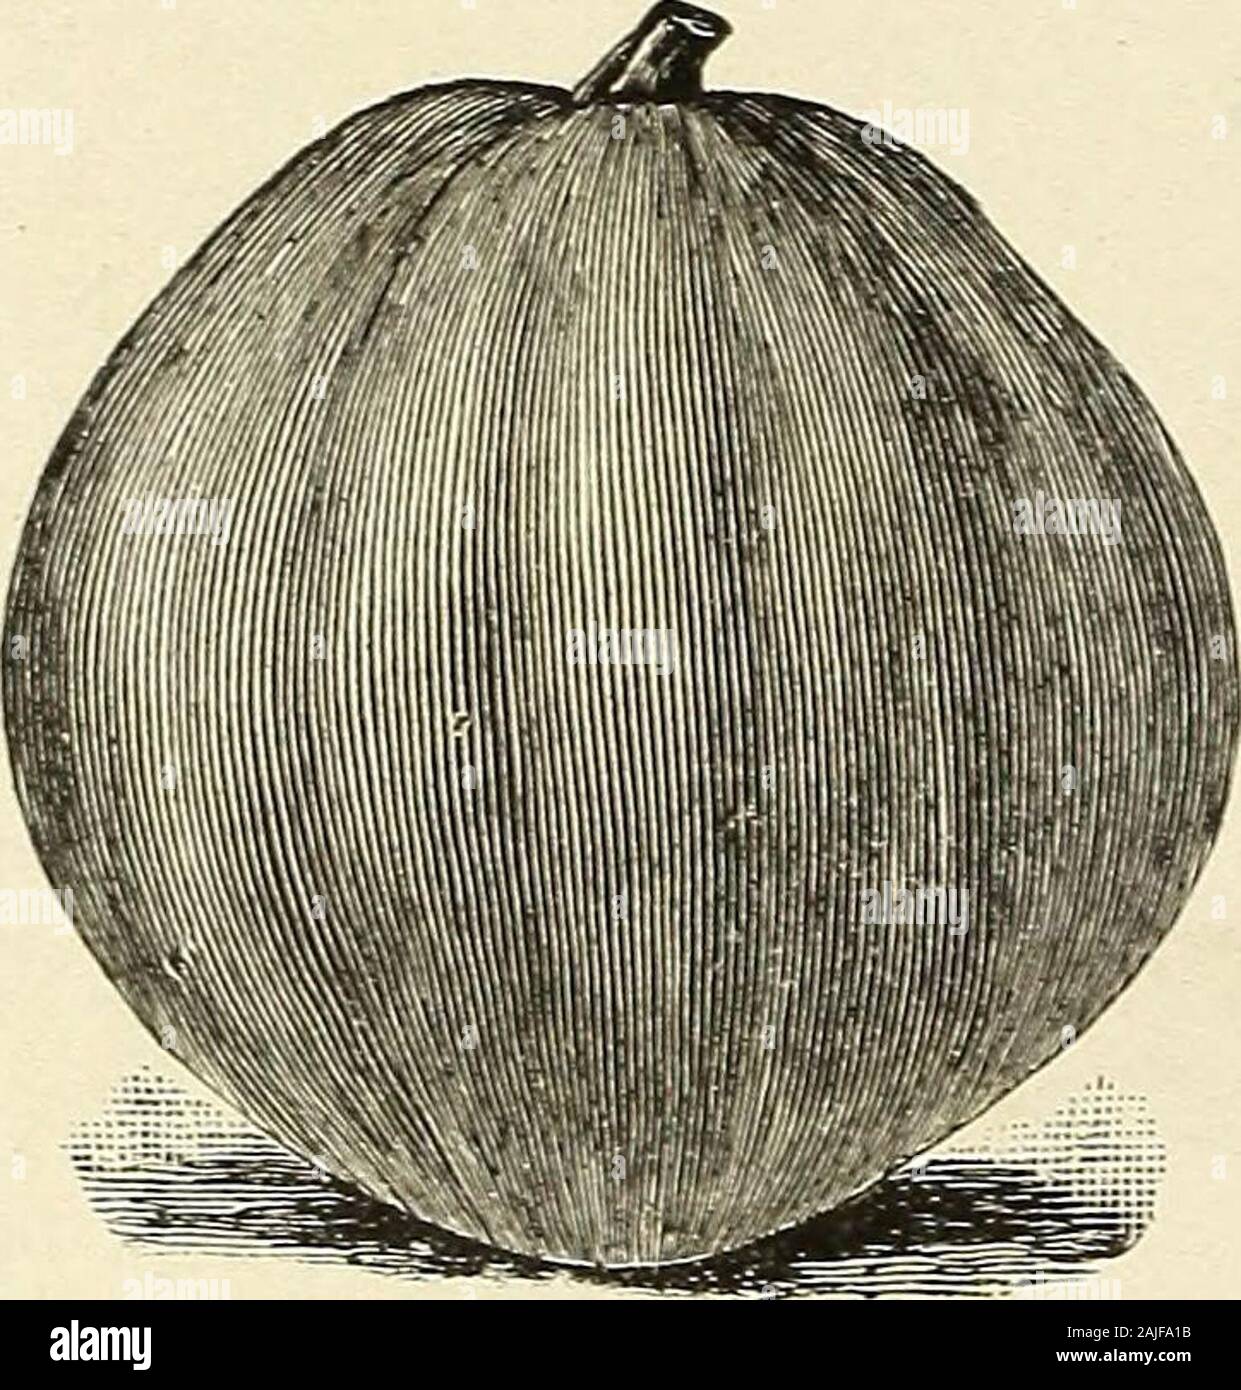 H.W Buckbee seed and plant guide : 1905 . E-VSandwich Island EminentSu rpris ing lyftne Variety New Winter Luxury—This I recommend as one of the best Pie Pump-kins; an excellent keeper and enormously productive. It is very finelyDetted and in color it is a golden russet. Pkt. 4c., oz. 8c.; 2 oz. 15c.; H,lb. 25c.; y» lb. 40c.; lb. 75c. large Cheese, sometimes called Kentucky Field—Large, round, flat-tened fruits witn broad ribs: creamy-buff skin: averages two feet indiameter. It is an excellent keeping variety, with thick flesh of ex-ceptionally fine qualitv. Very popular for all purposes. Pkt. Stock Photo